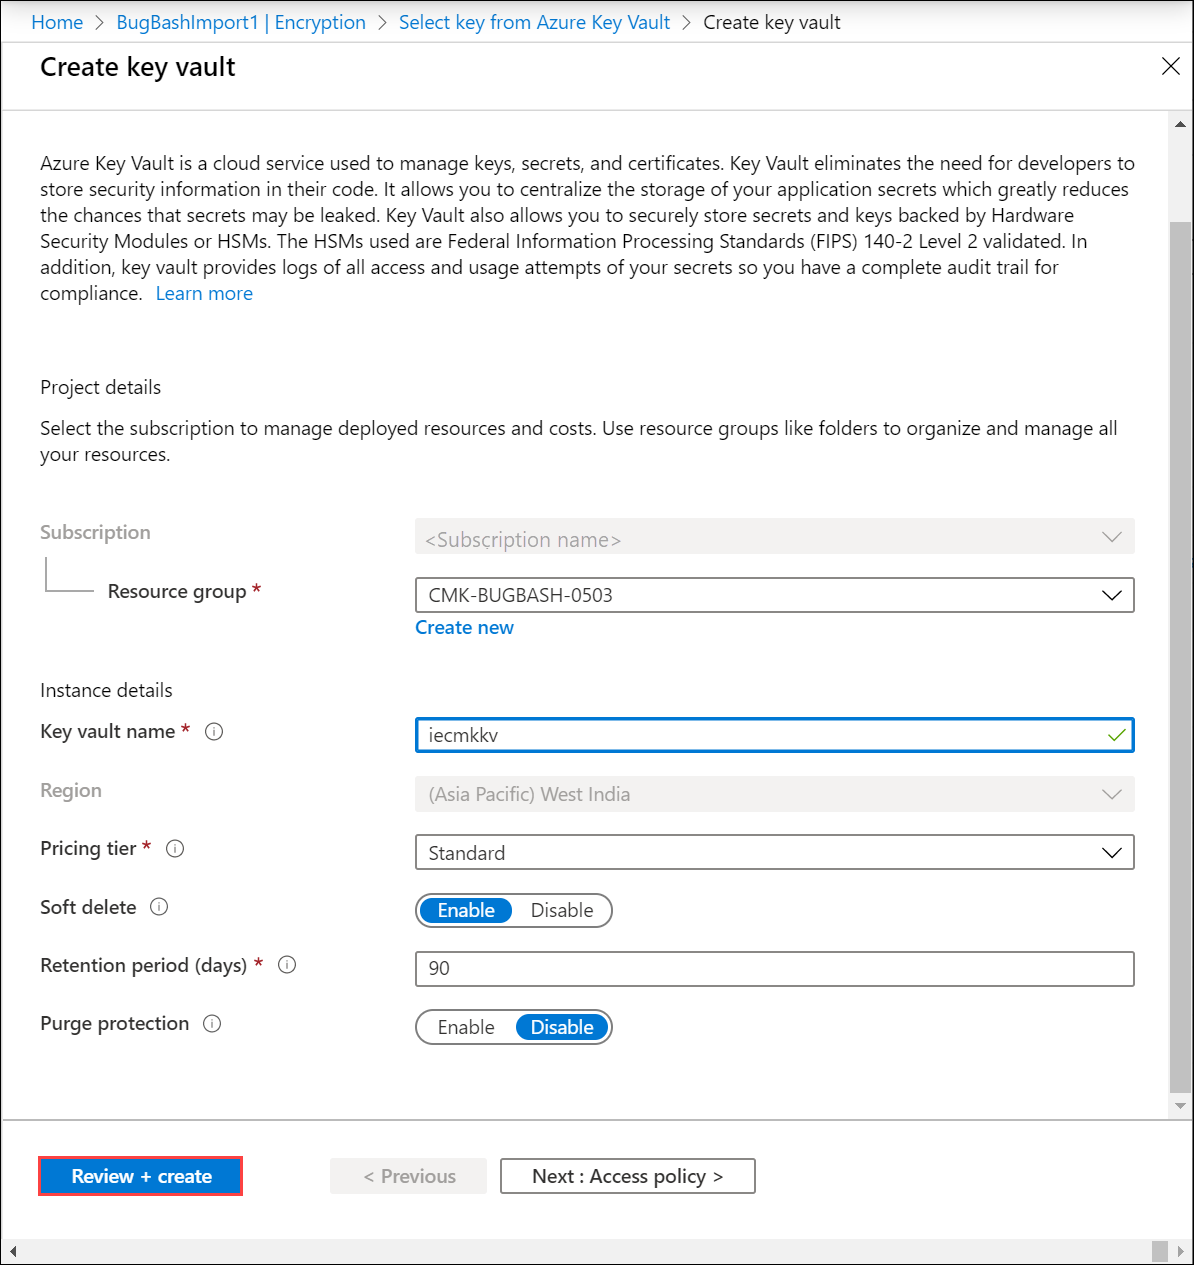 Screenshot of "Create key vault" screen for Azure Key Vault with sample settings. The Review Plus Create button is highlighted.